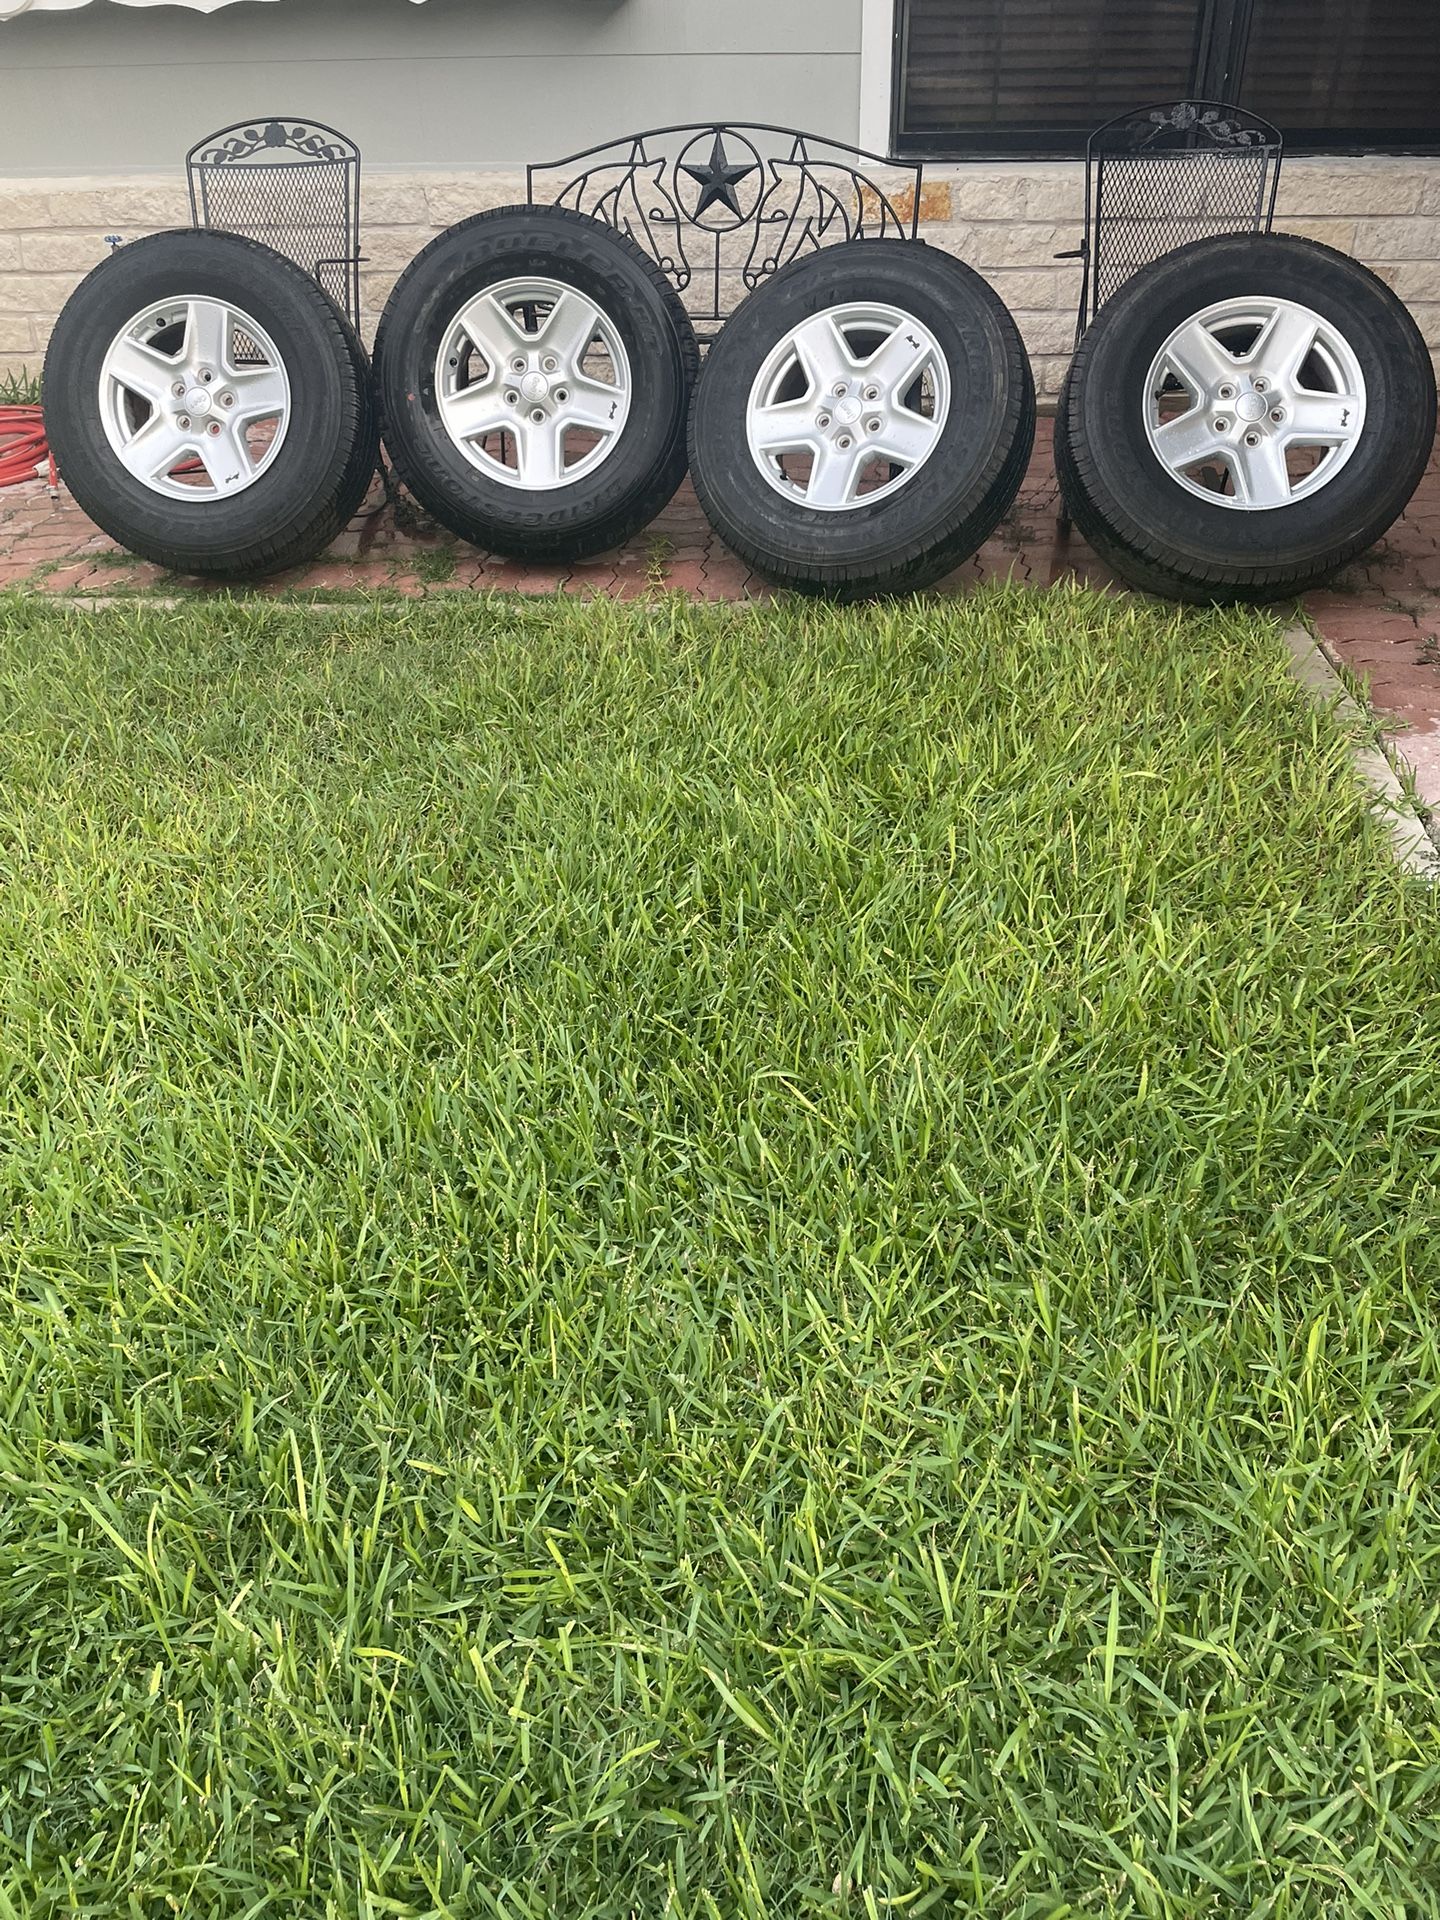 Jeep Gladiator Or Jeep Wrangler Bridgestone Dueler H/T 245/75R17 H/T. 5 Wheels And A Spare. New.  And Tires. 